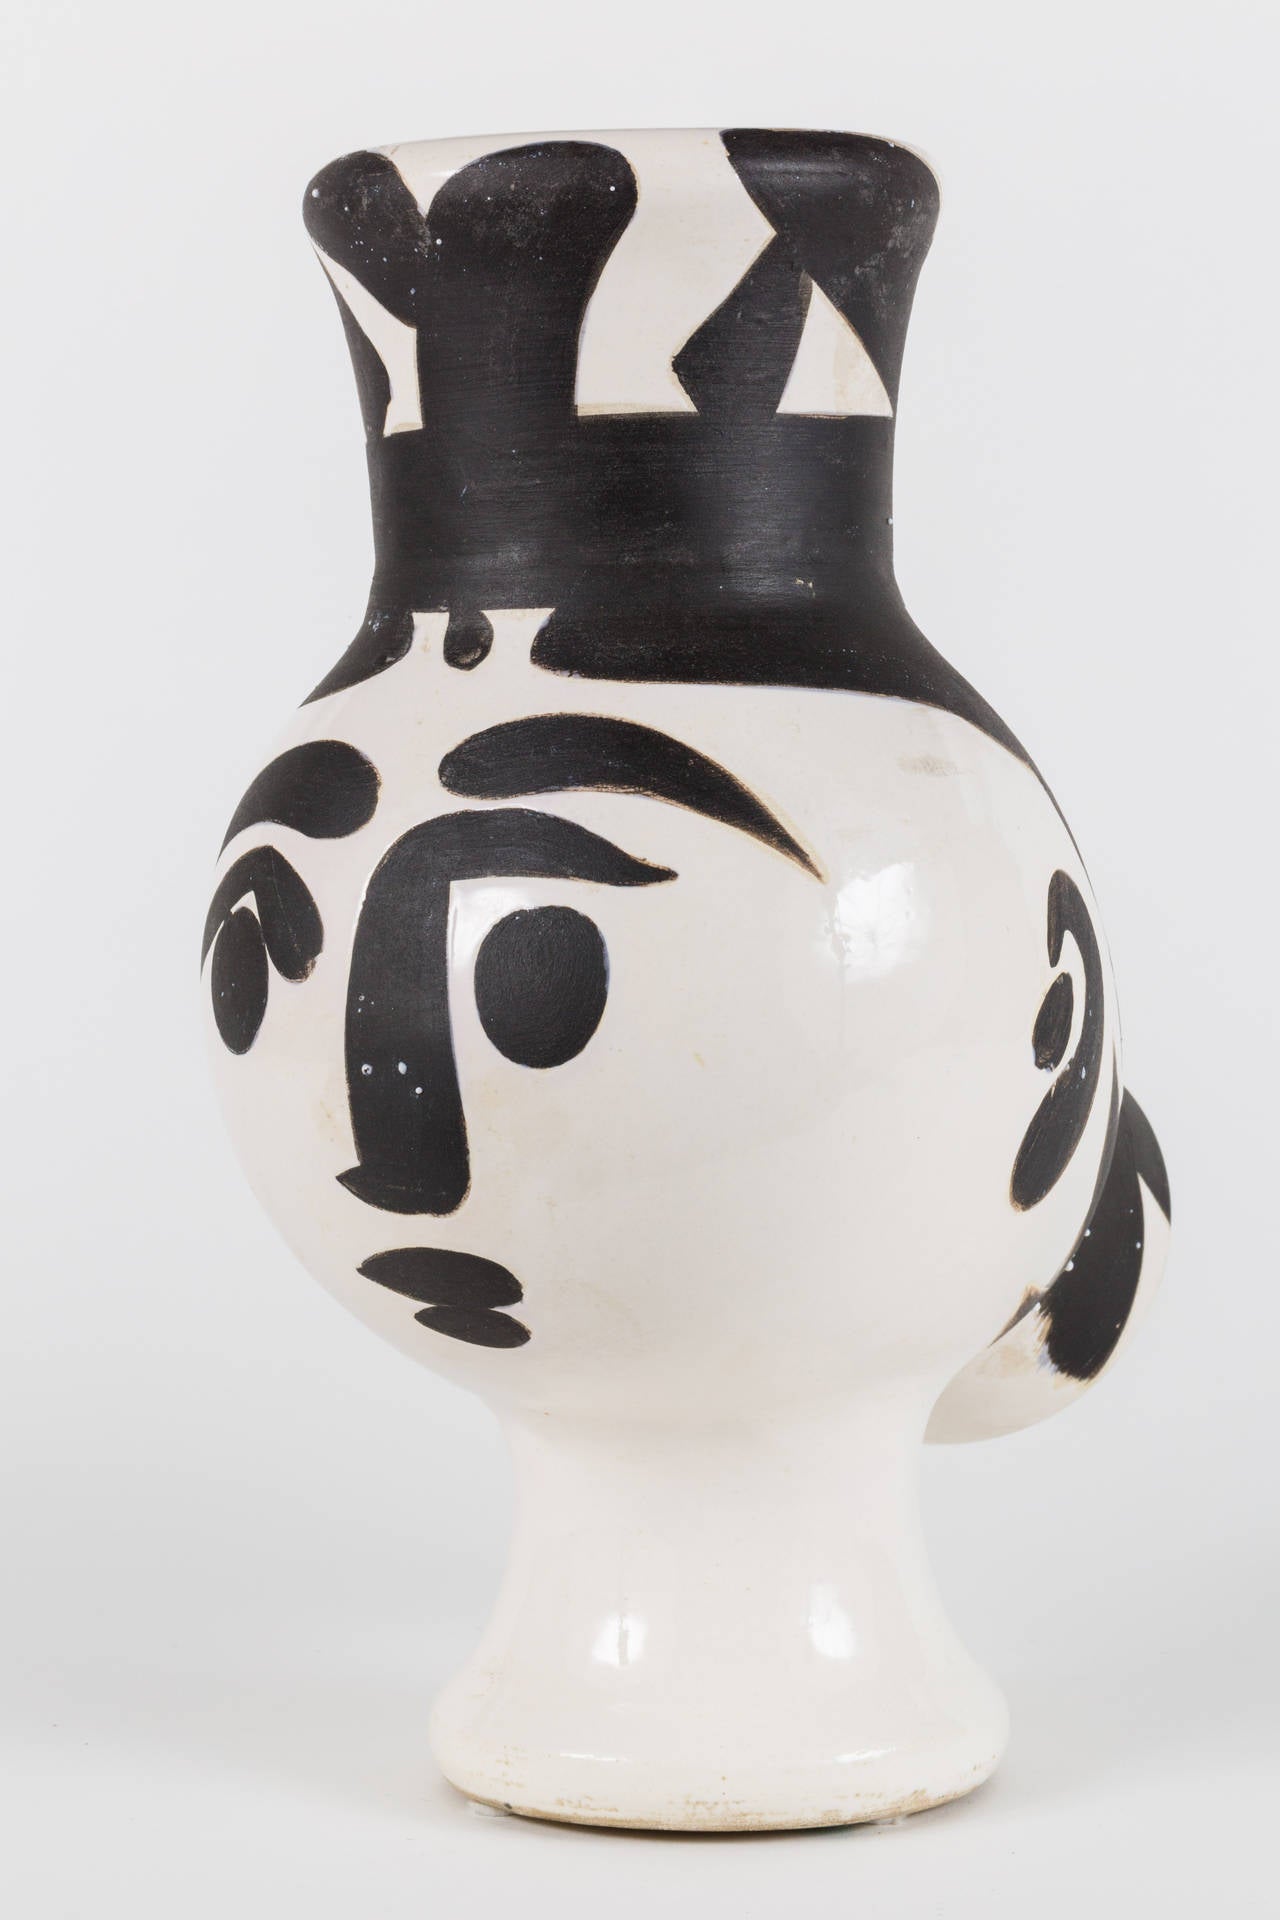 French Chouette Femme or Owl Woman Vase by Picasso for Madoura Ceramics, No. 119